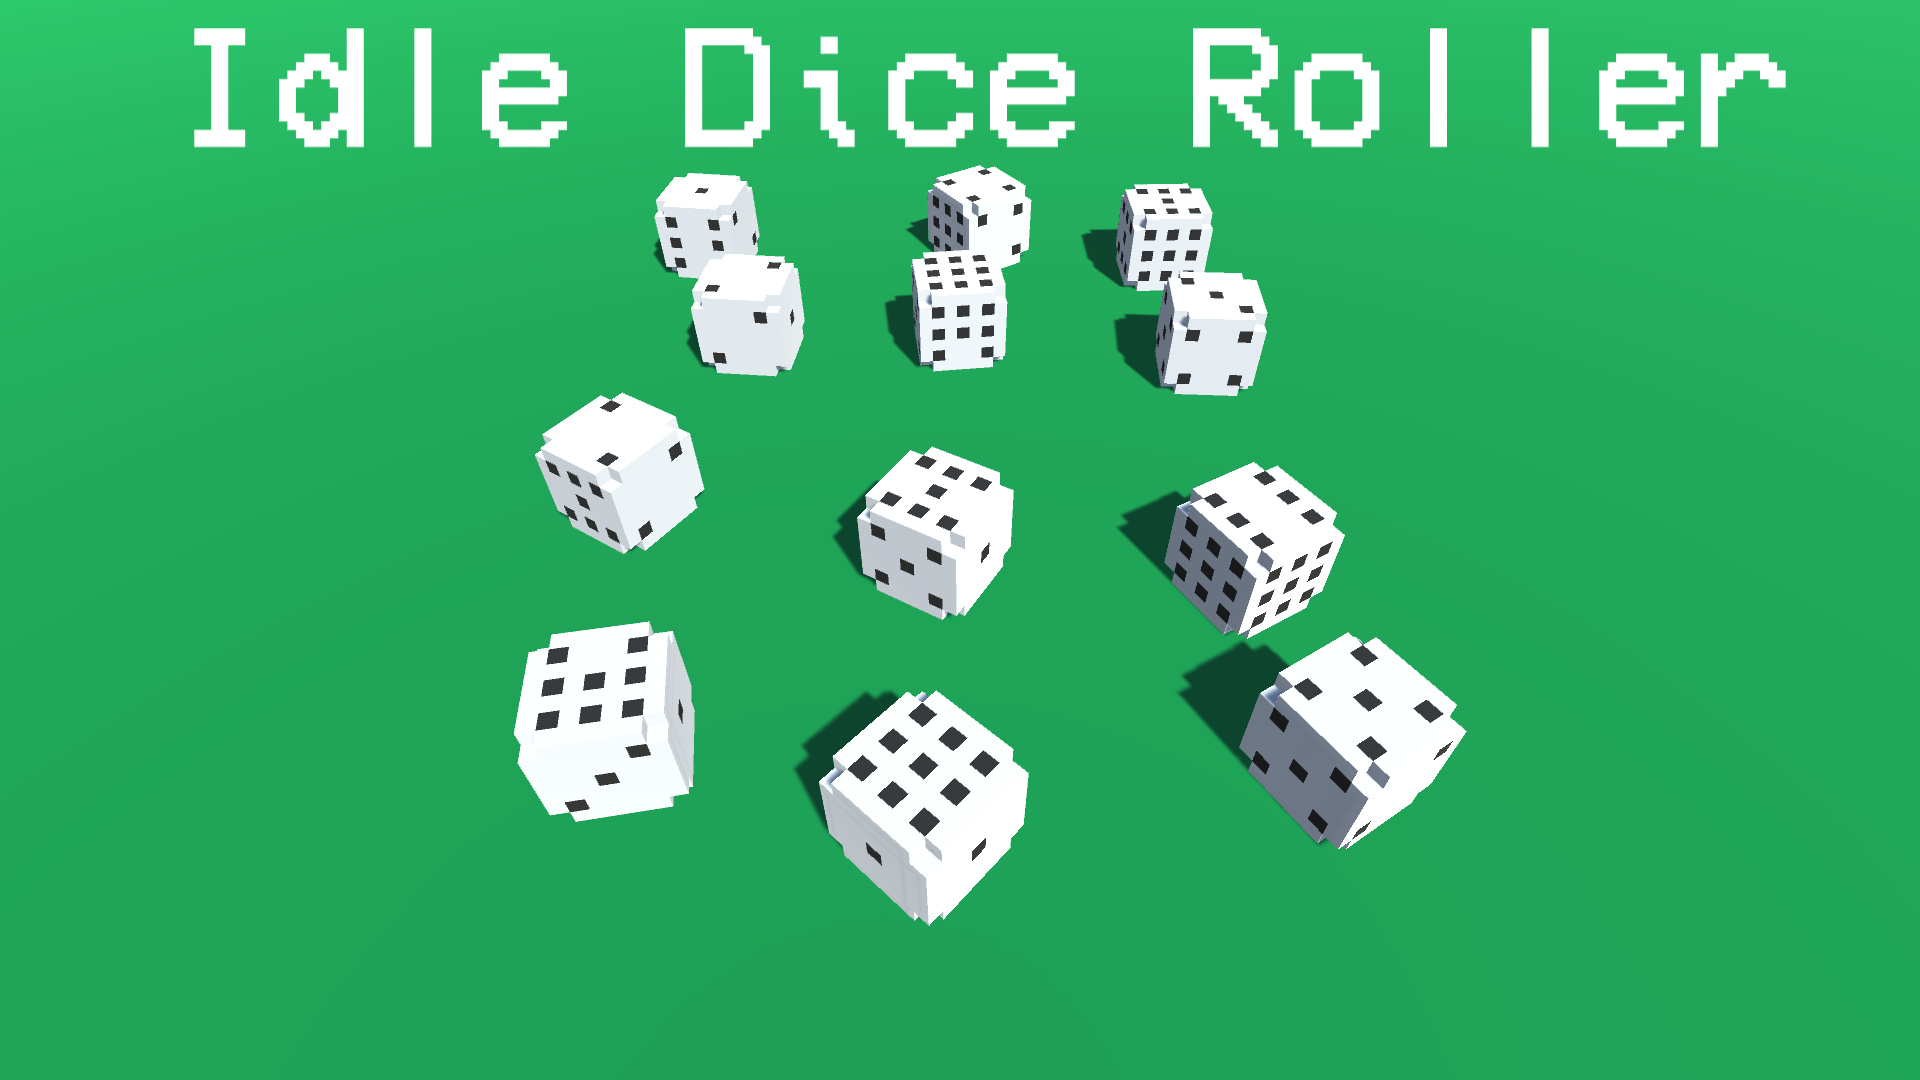 Dice and roll speed up. Roll the dice. Dice Roller. Roll the dice v0.2.0. Chosen by fare dice Roll.